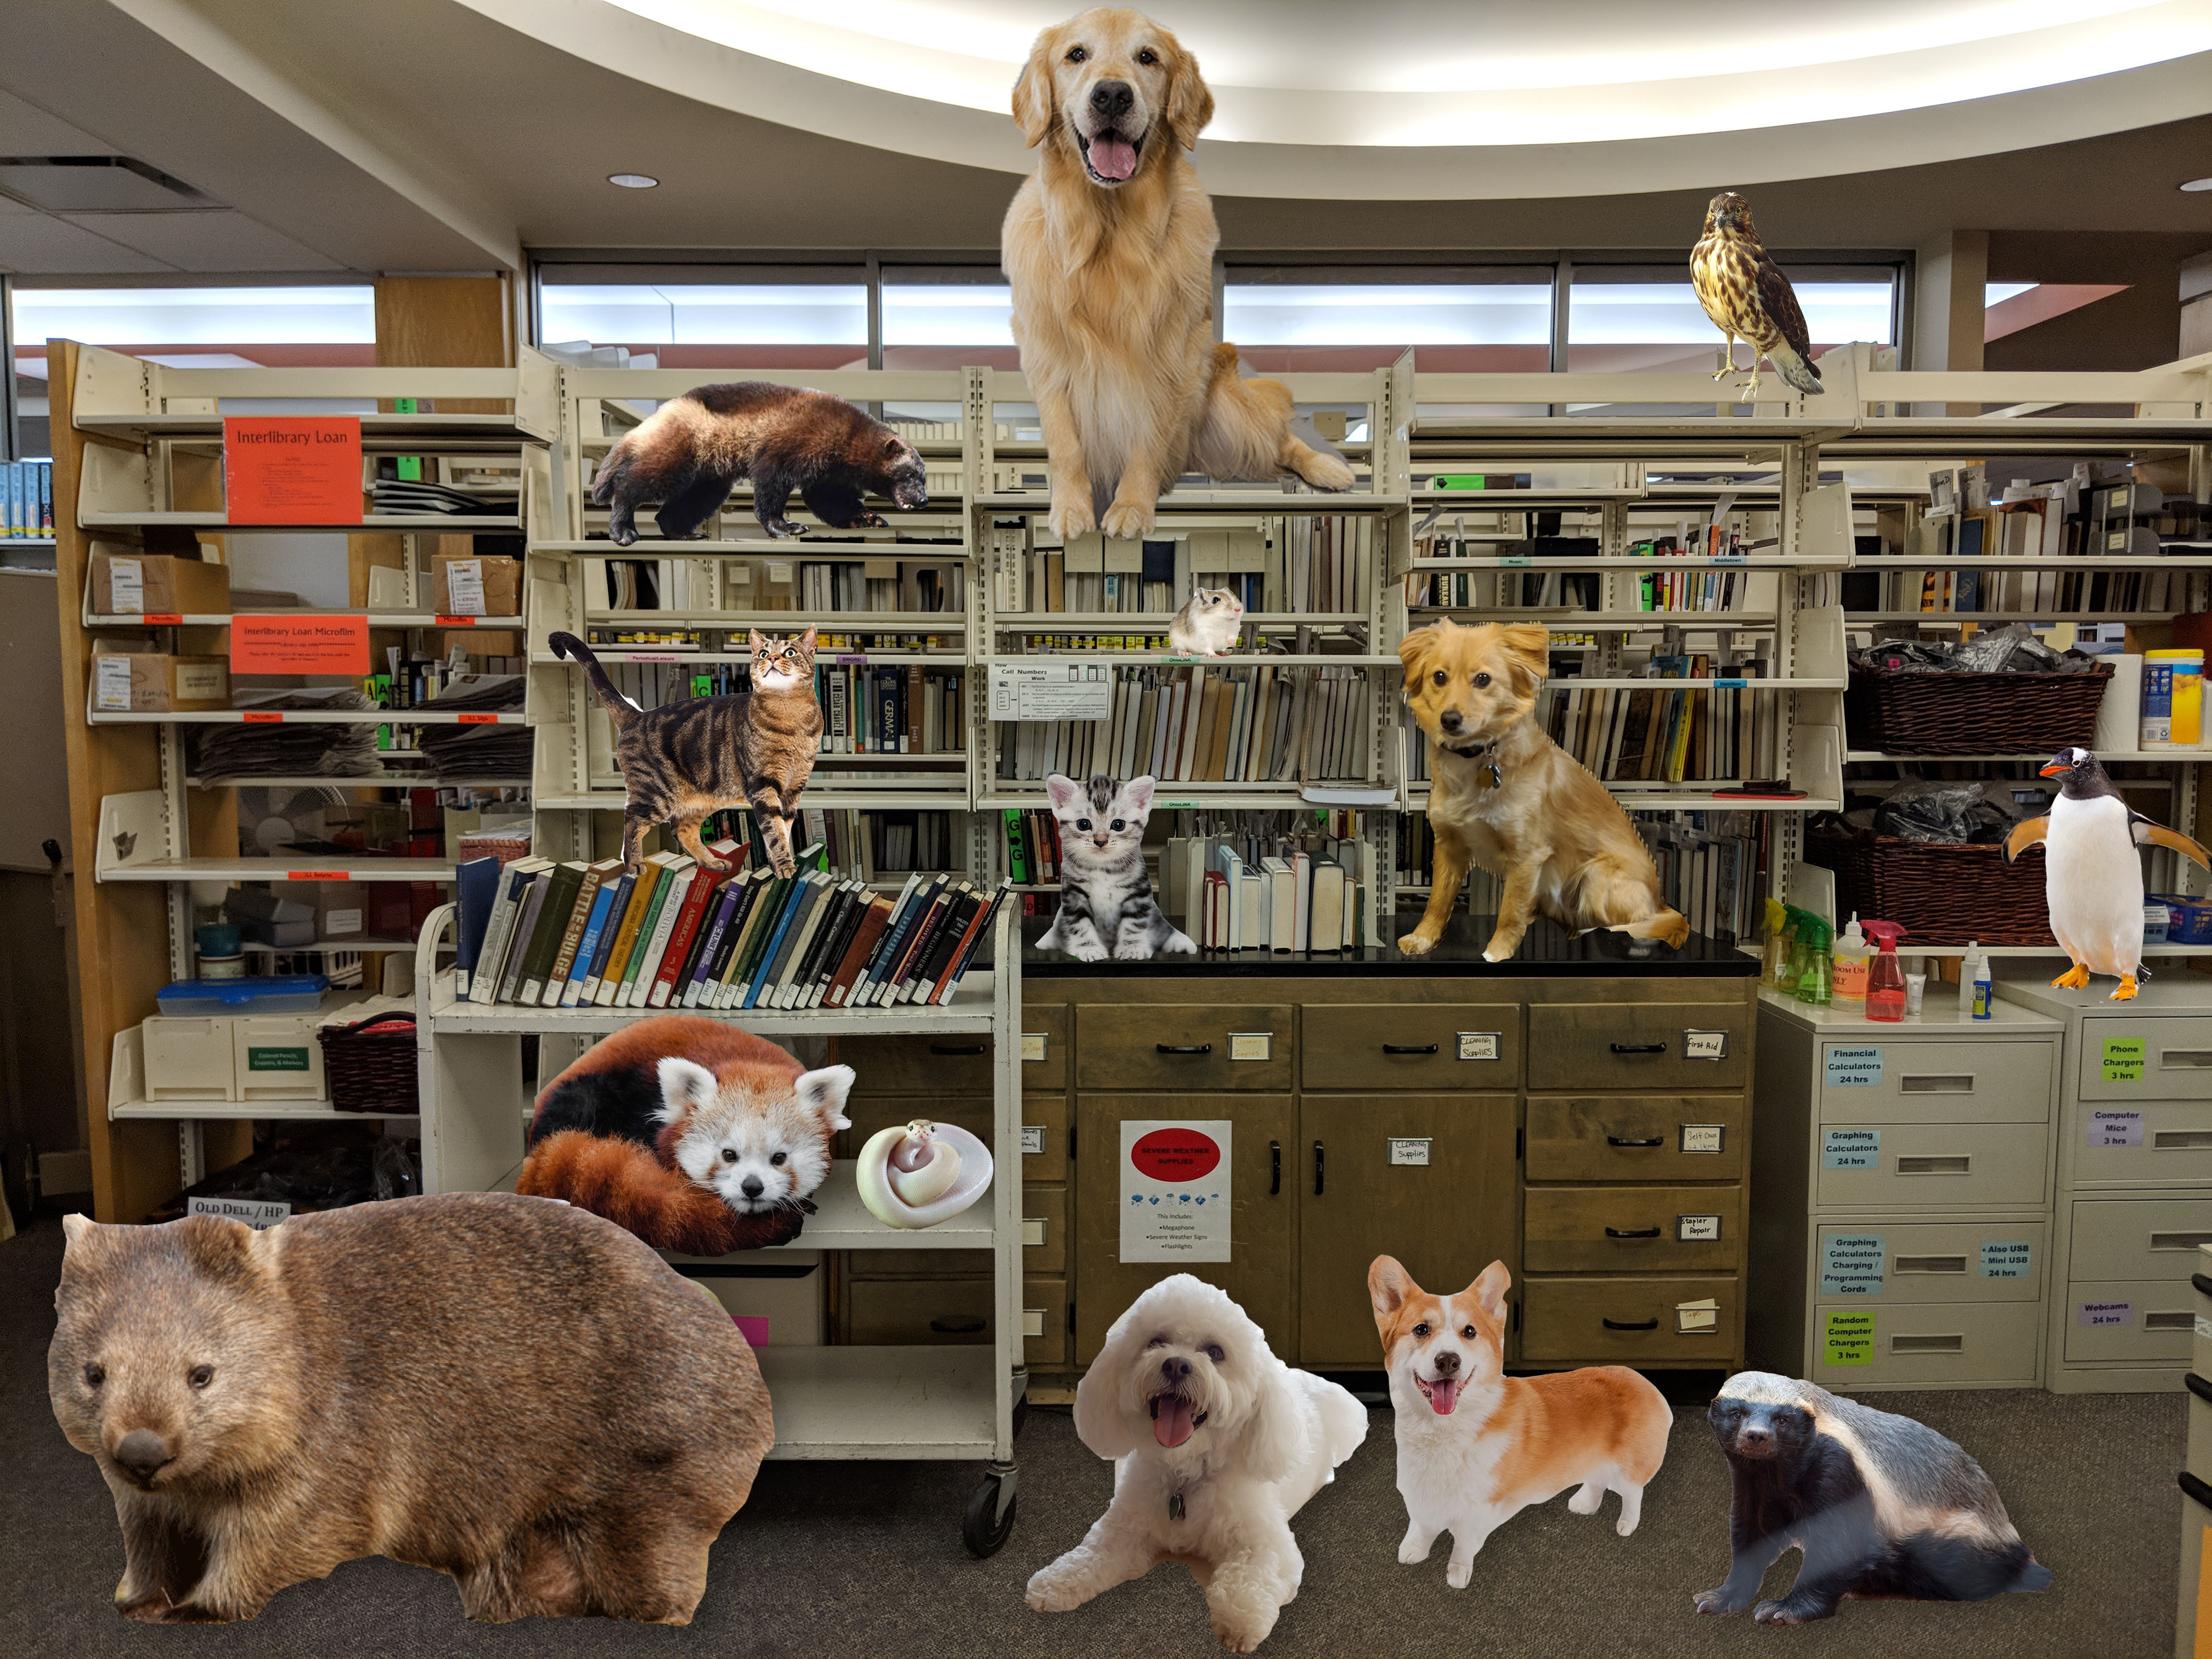 Library shelves with animals obviously photoshopped onto them: cats, dogs, badgers, wombat, penguin, fox and a hawk